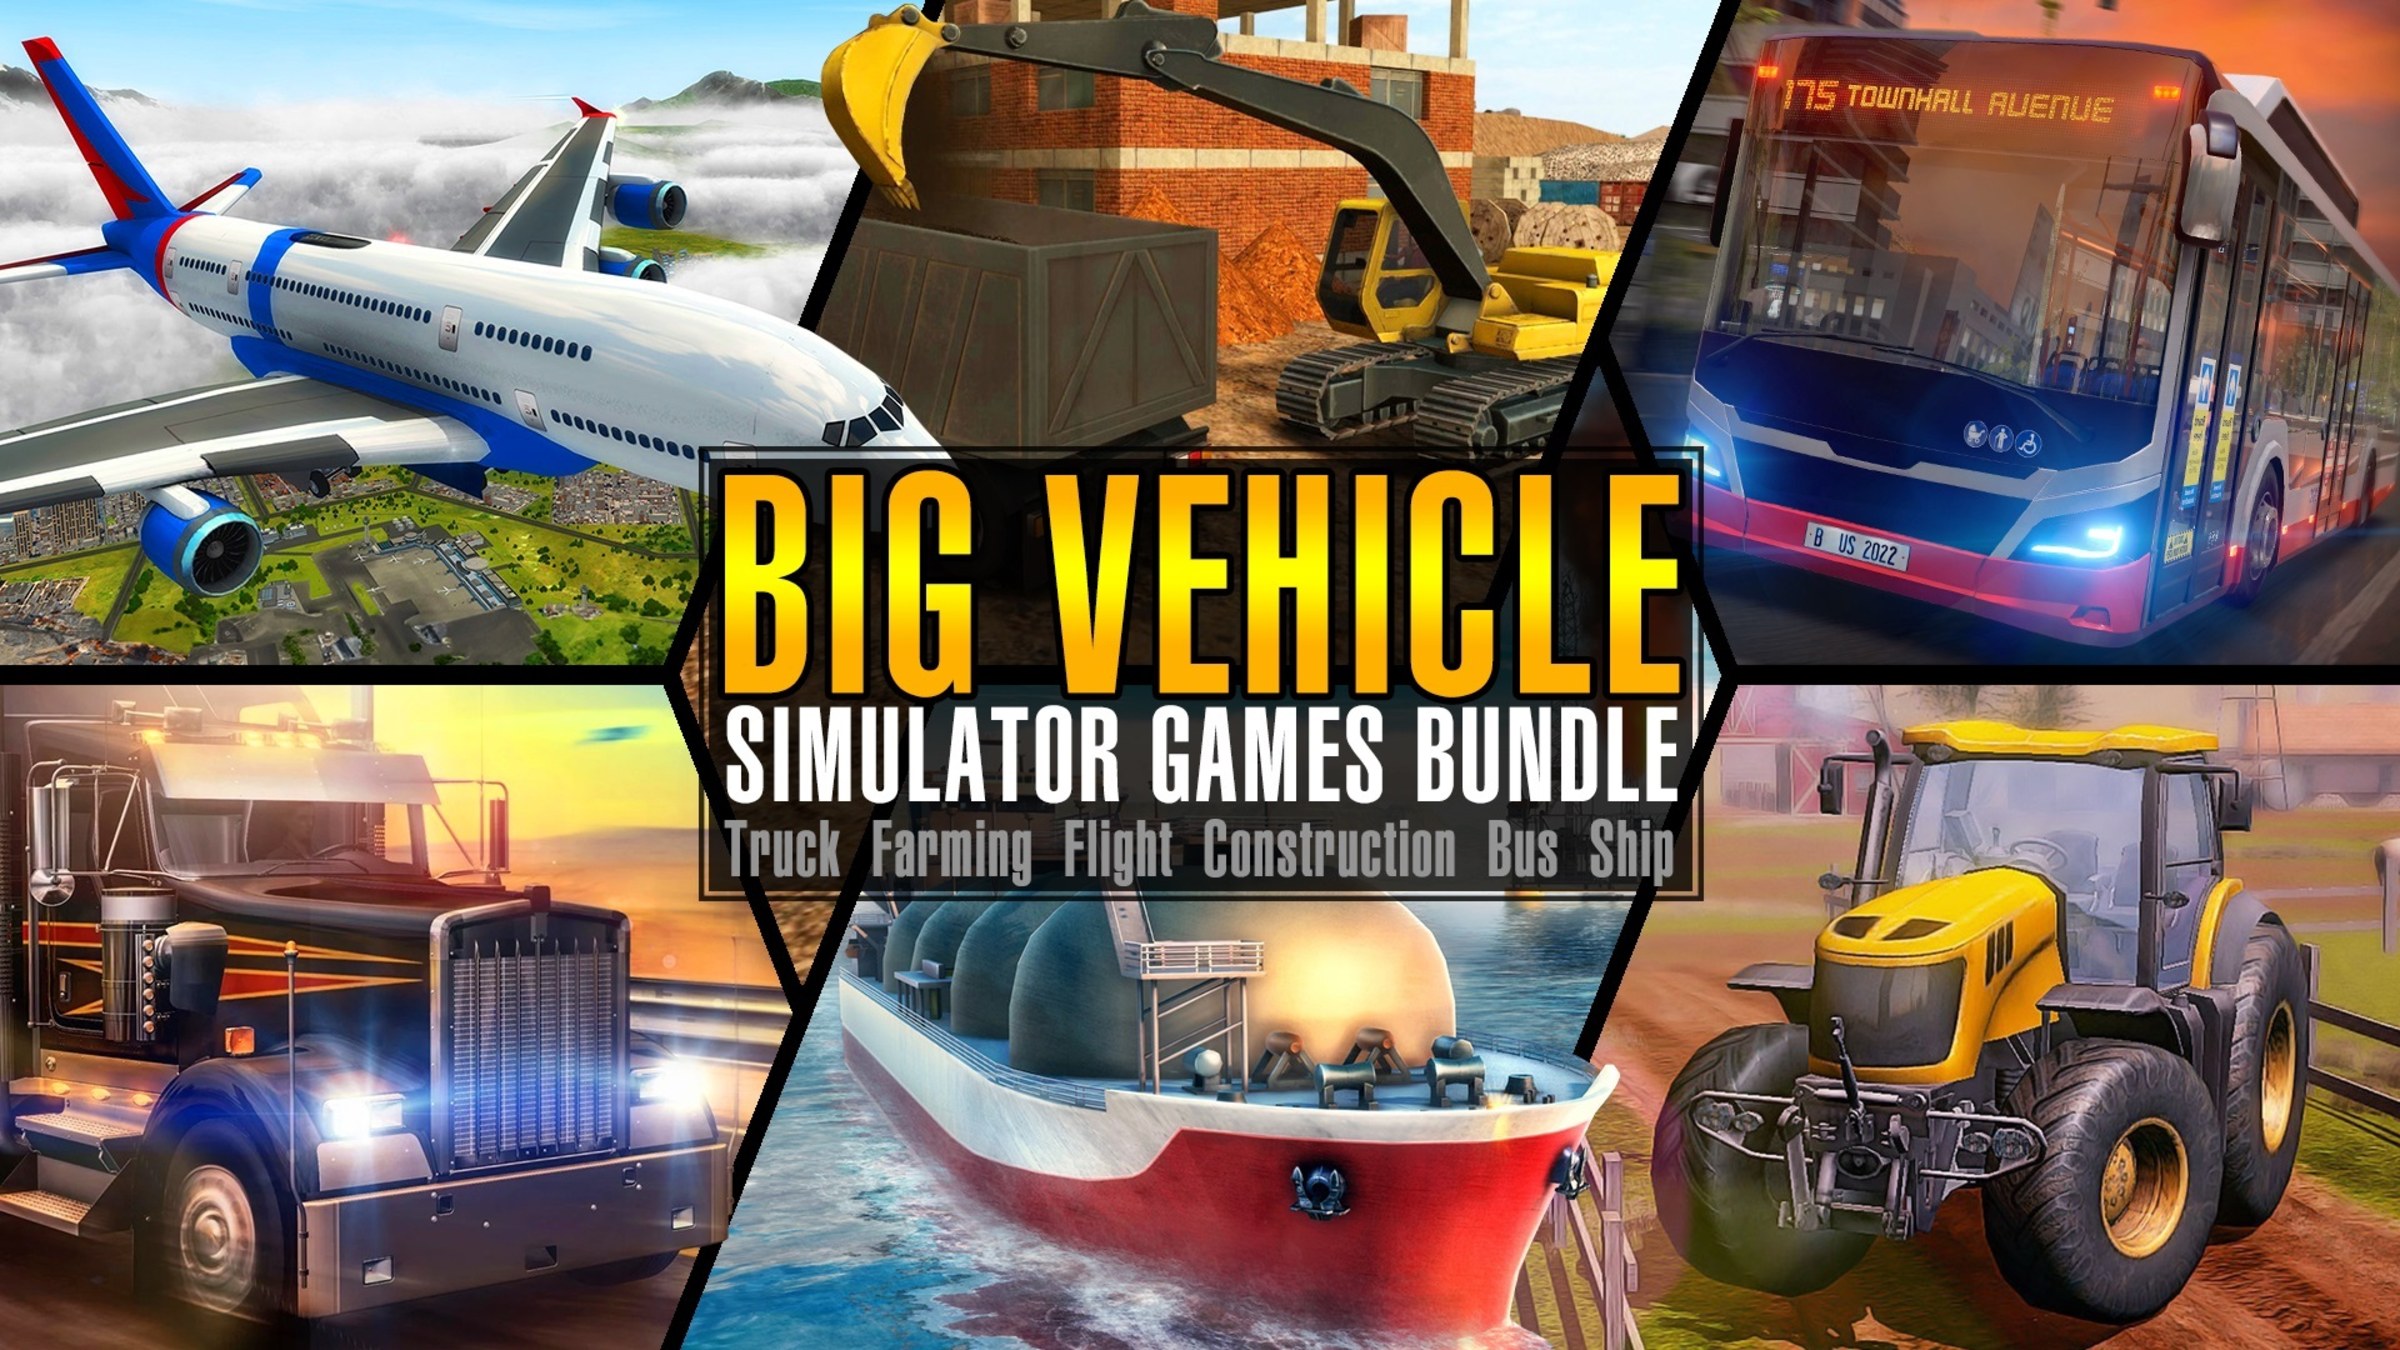 Vehicle Simulation Games PC: Most popular PC Games